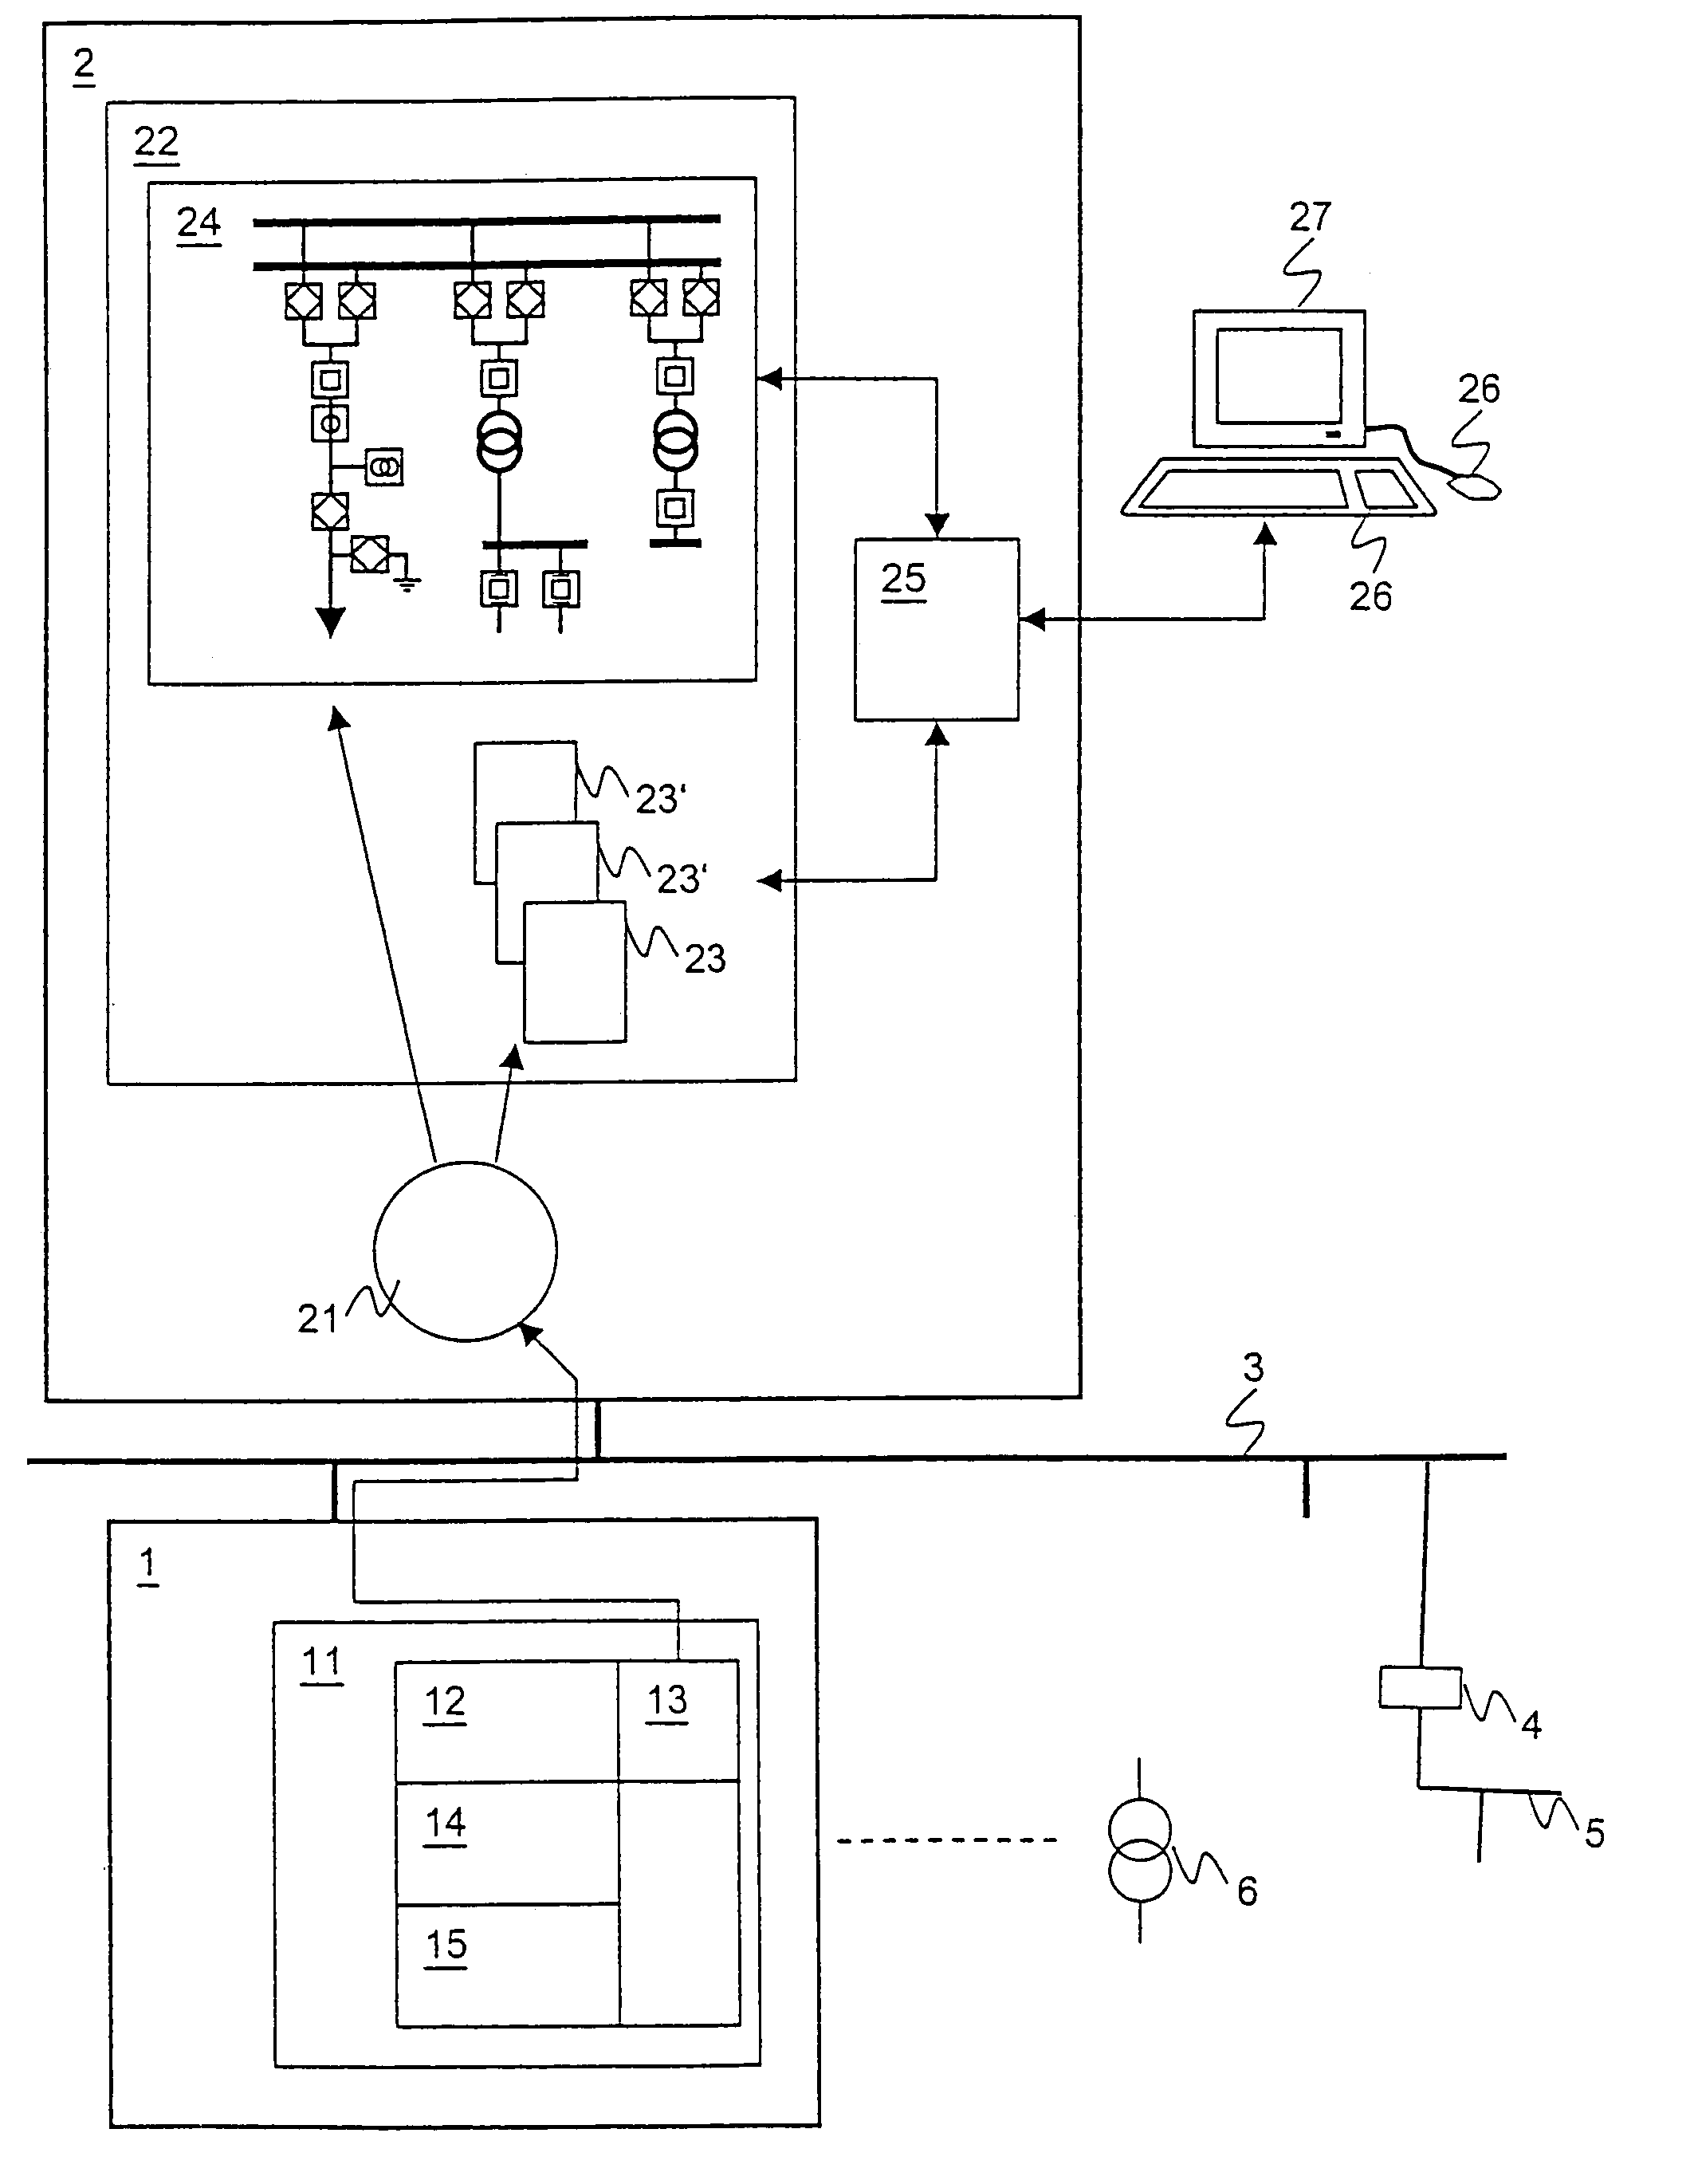 Integration of a field device in an installation control system